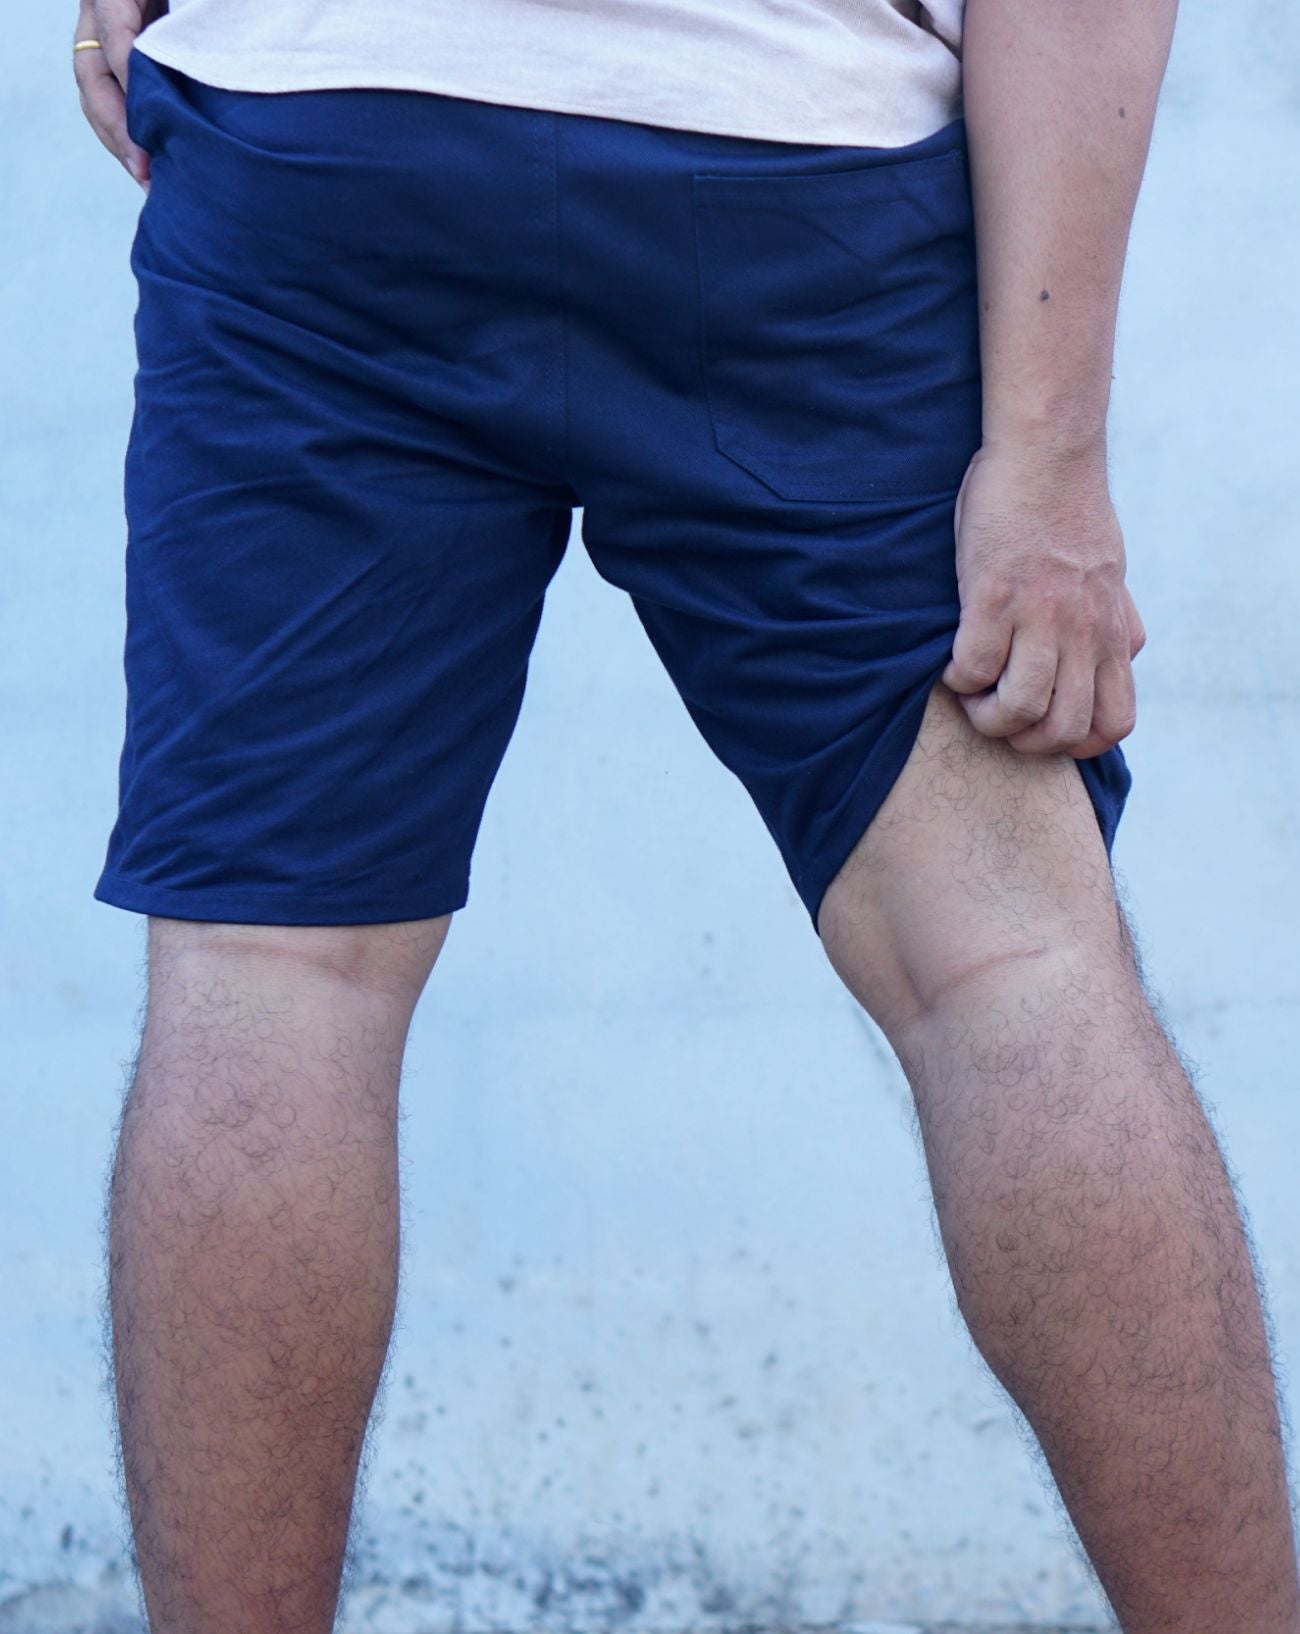 How to Prevent Chafing